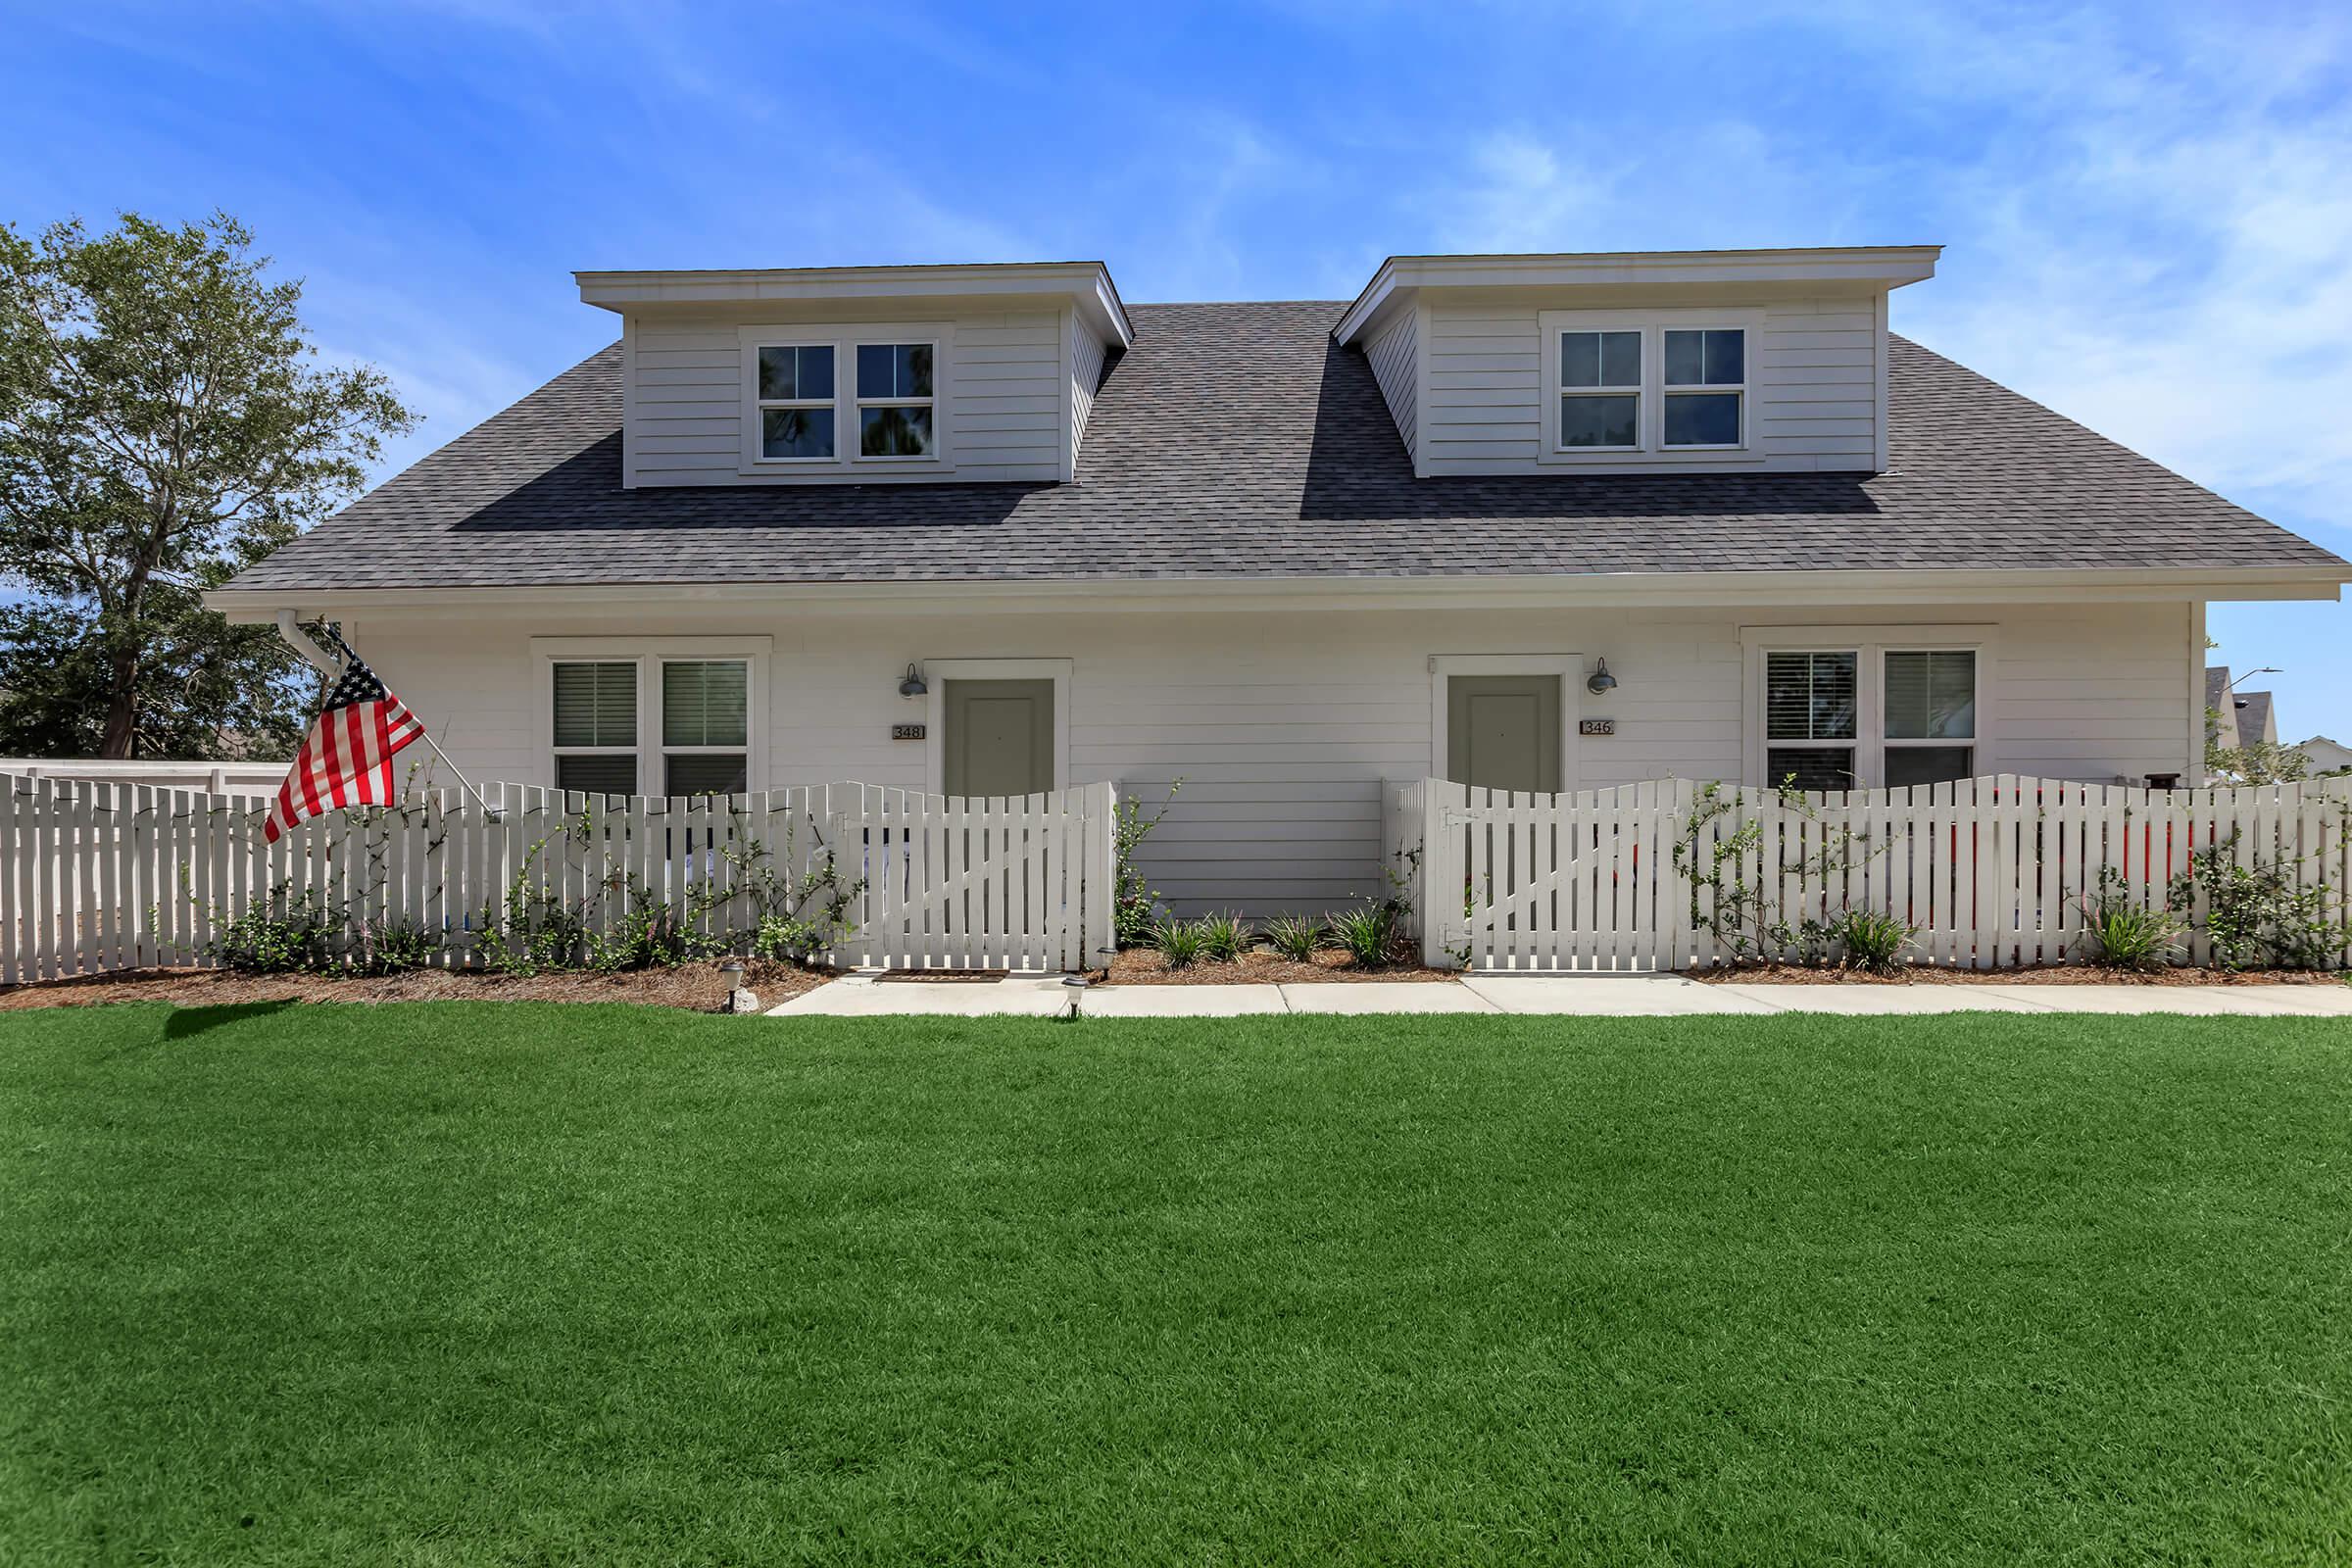 Beautiful landscaping at The Townhomes at Beau Rivage in Wilmington, NC.